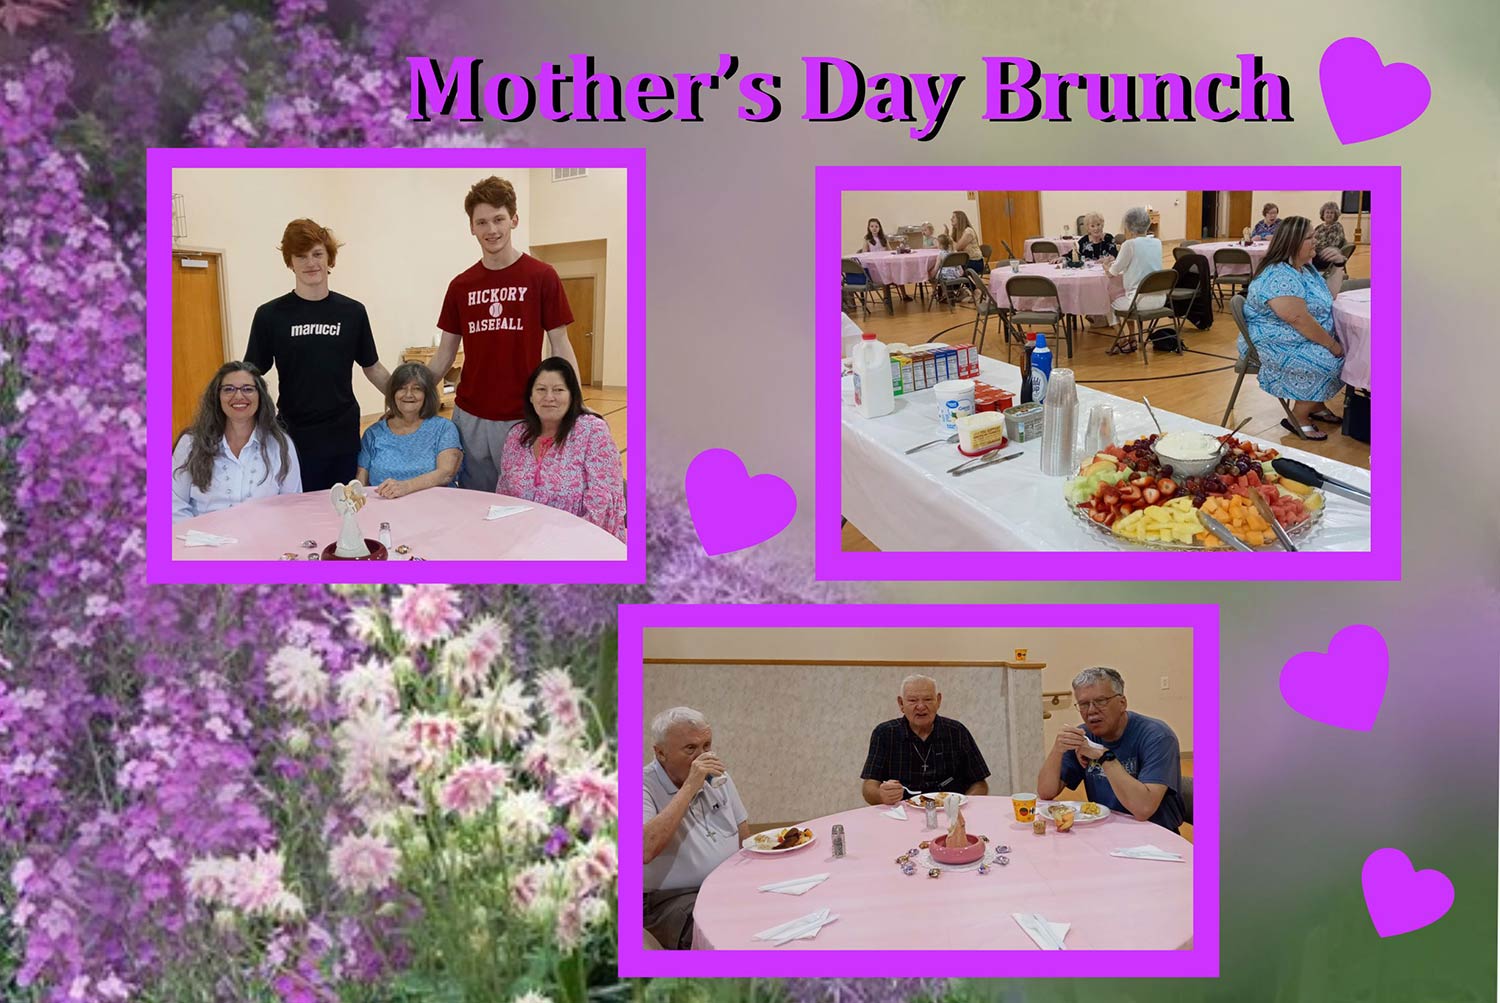 Mother's Day brunch at Christ Lutheran Church, Hickory